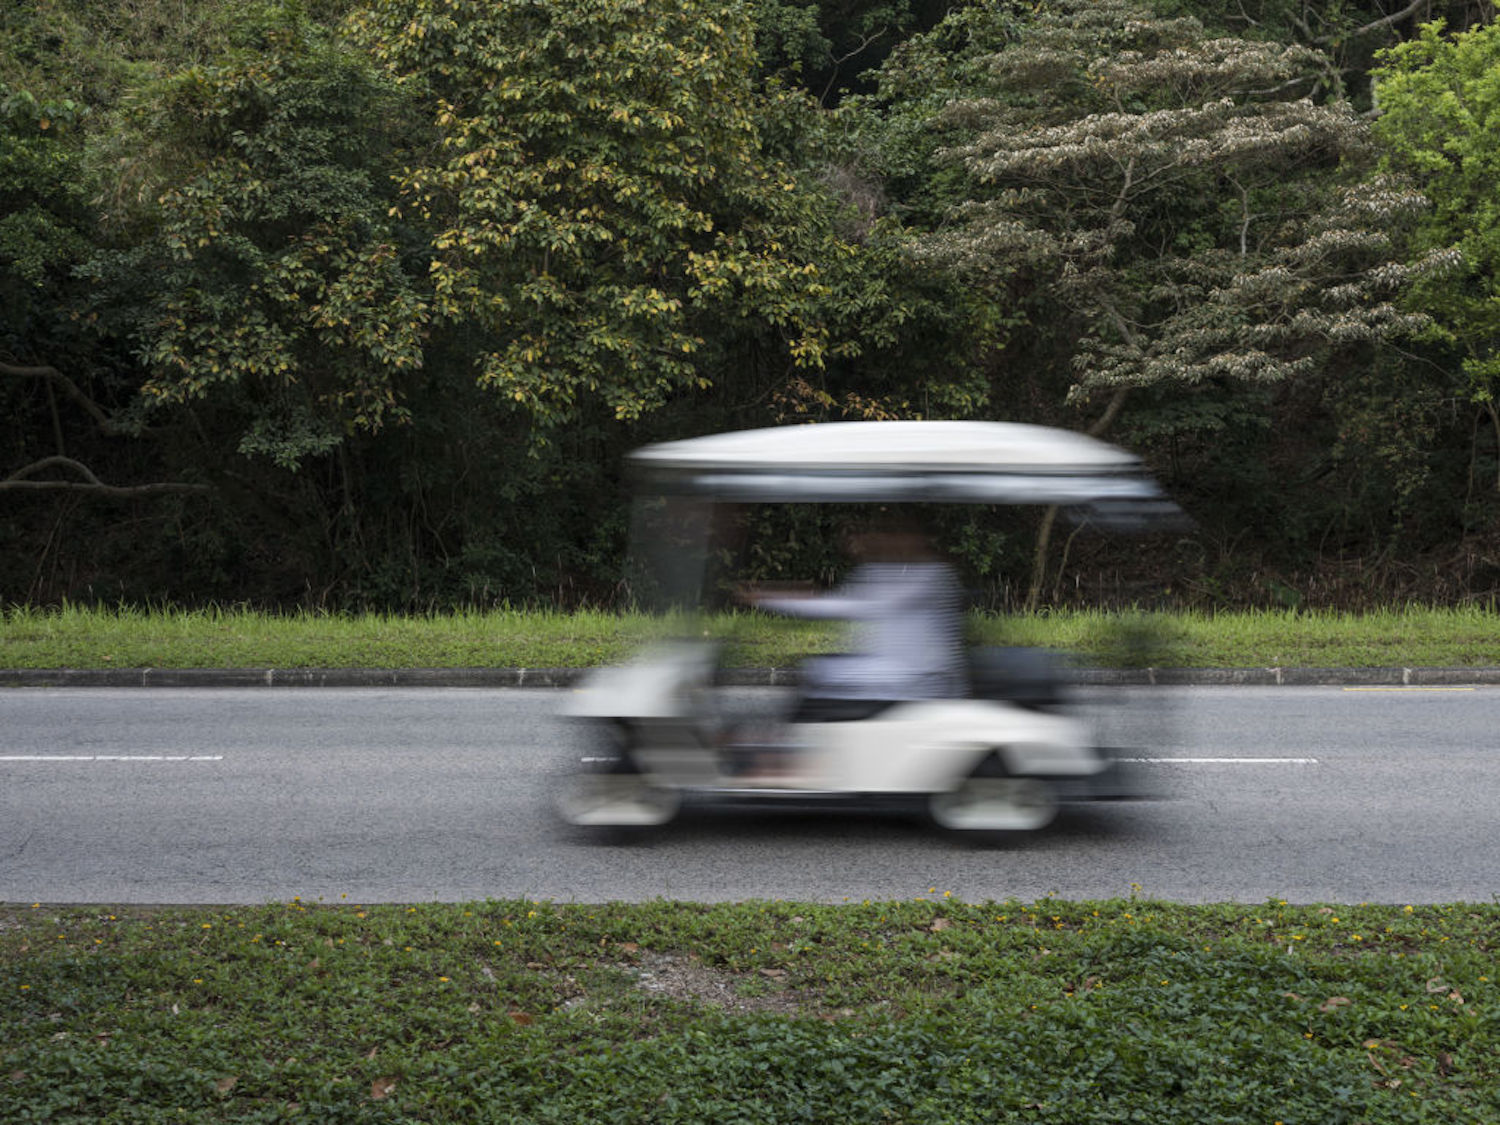 A white golf cart travels on a road